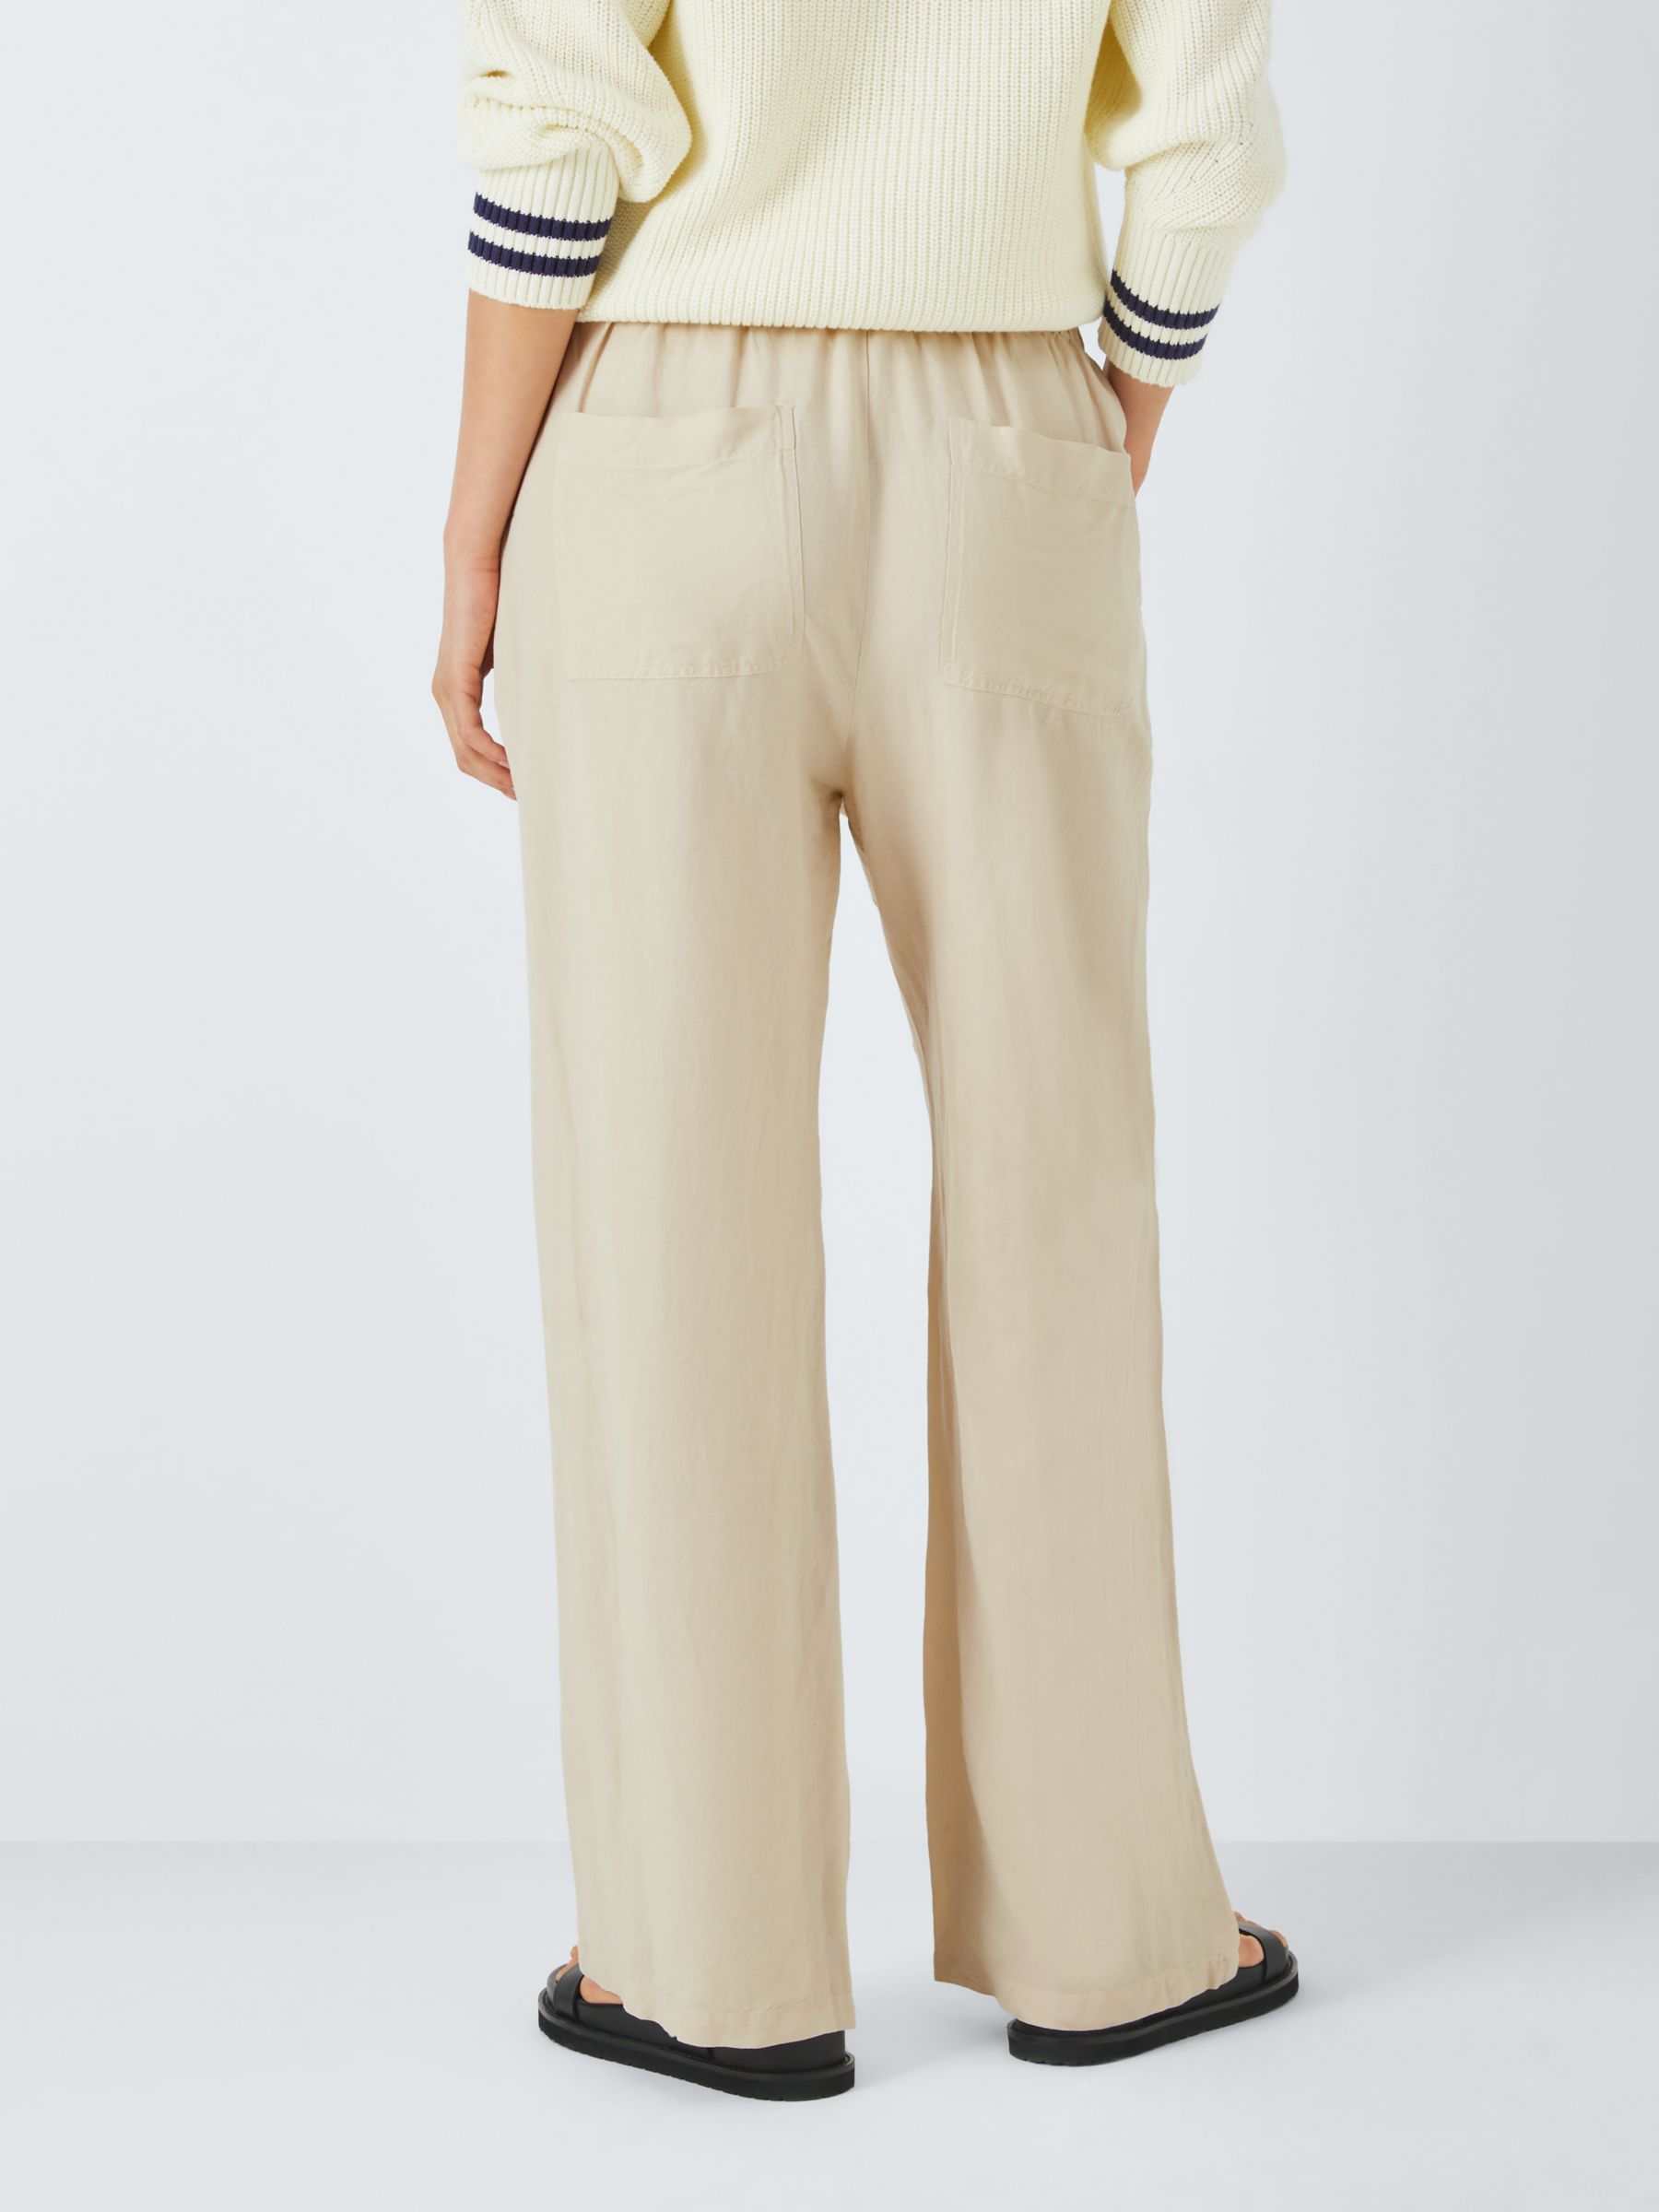 John Lewis ANYDAY Plain Tailored Linen Blend Trousers, Oatmeal, 16